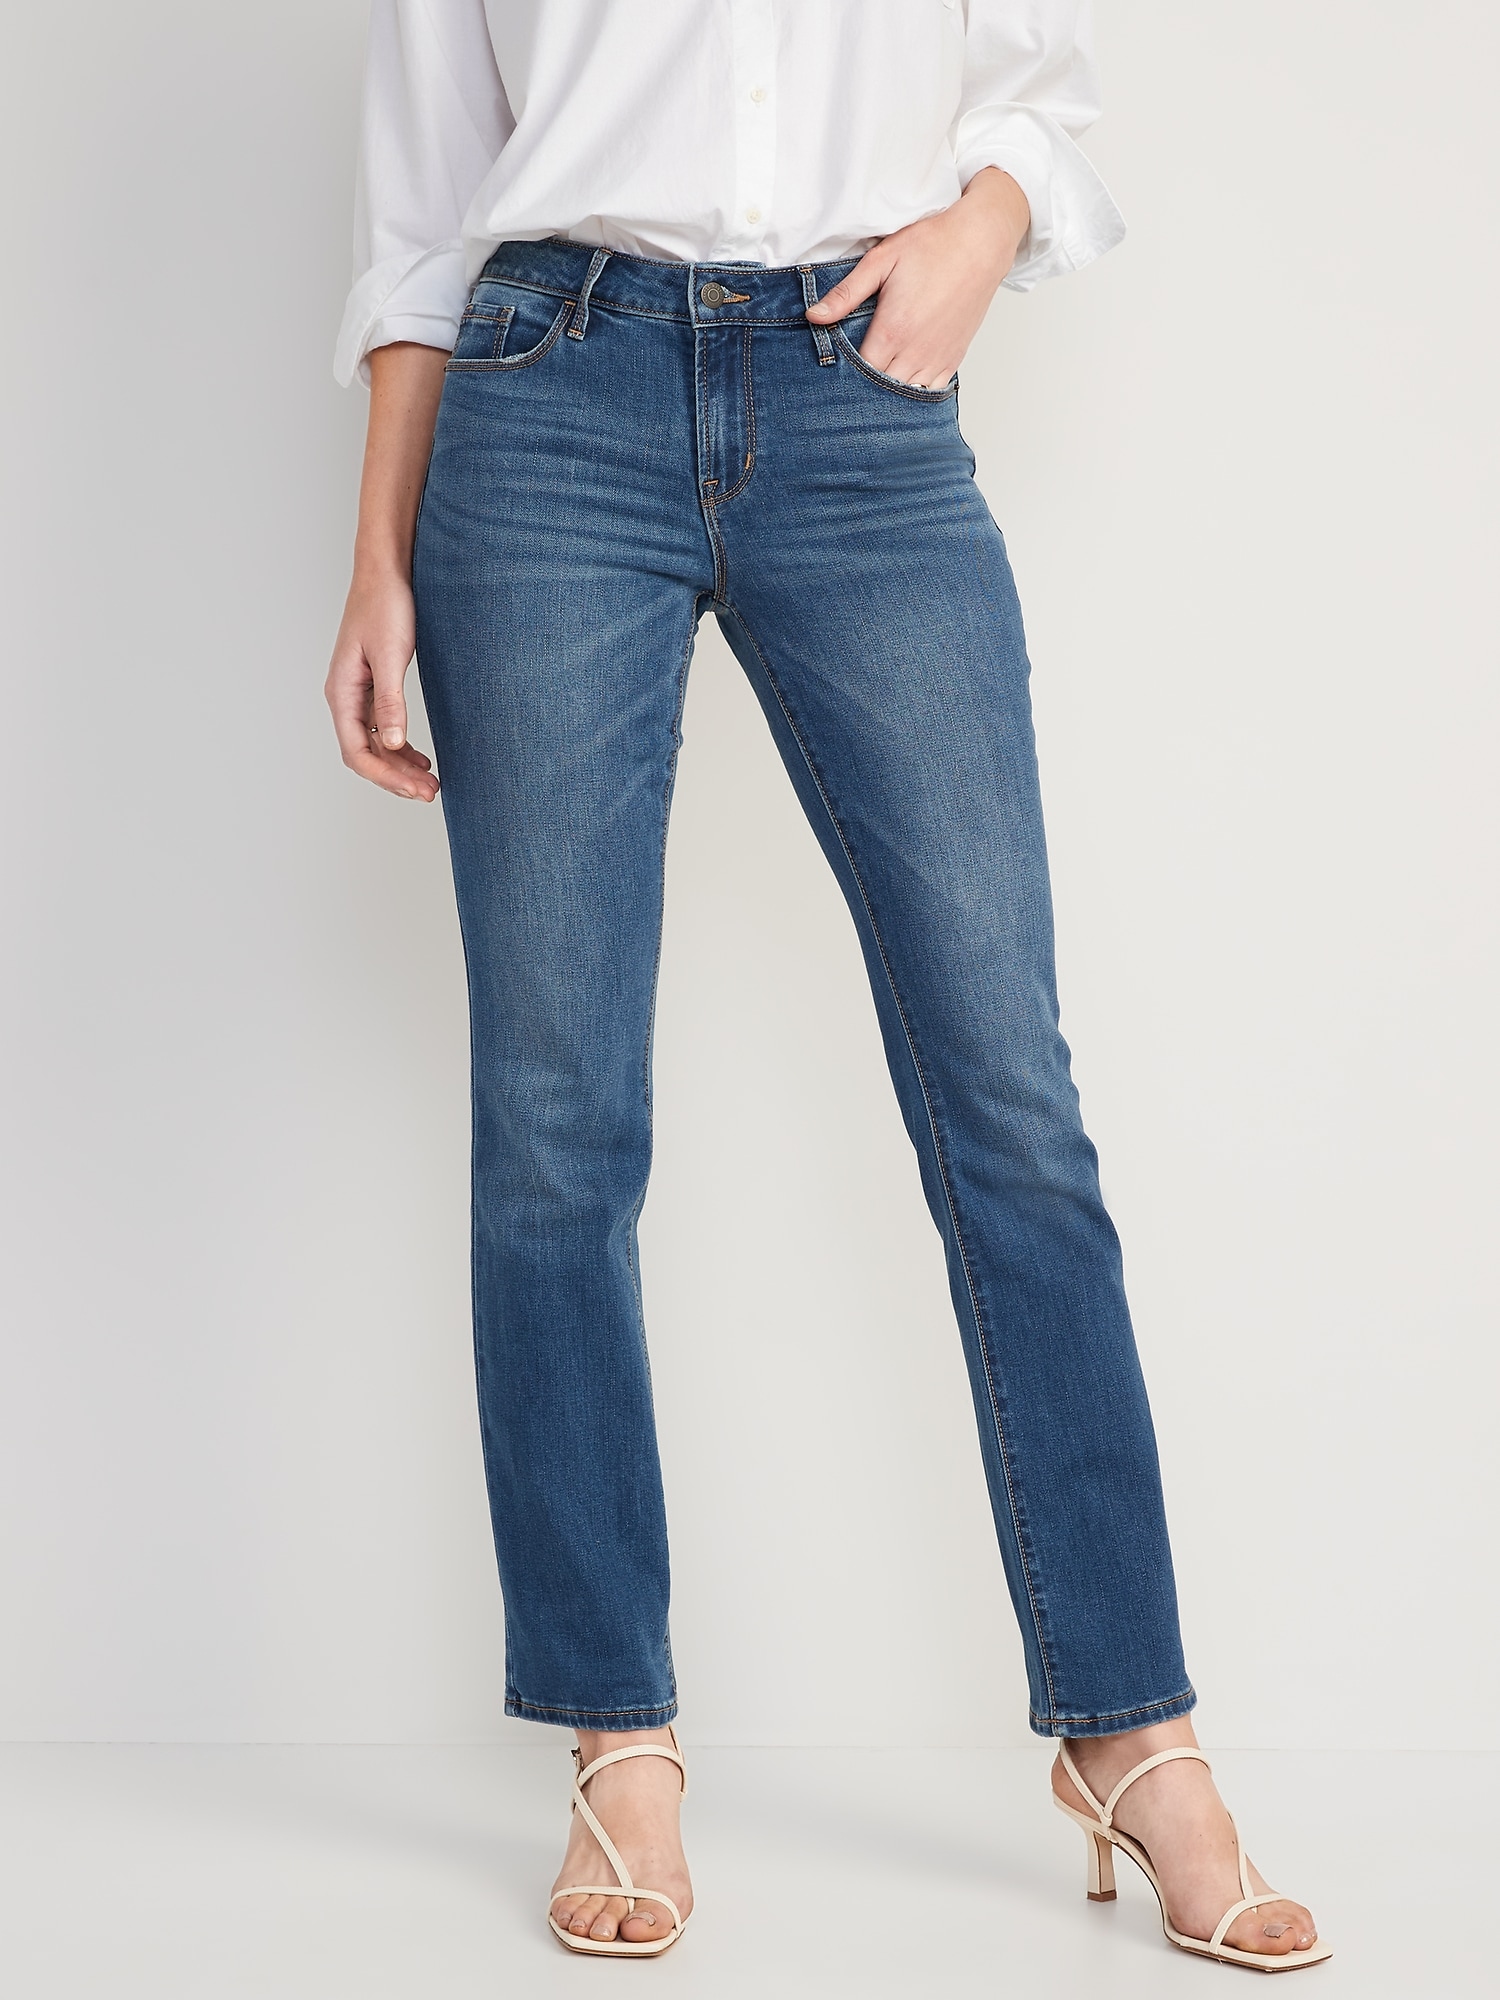 Mid-Rise Kicker Boot-Cut Jeans for Women | Old Navy